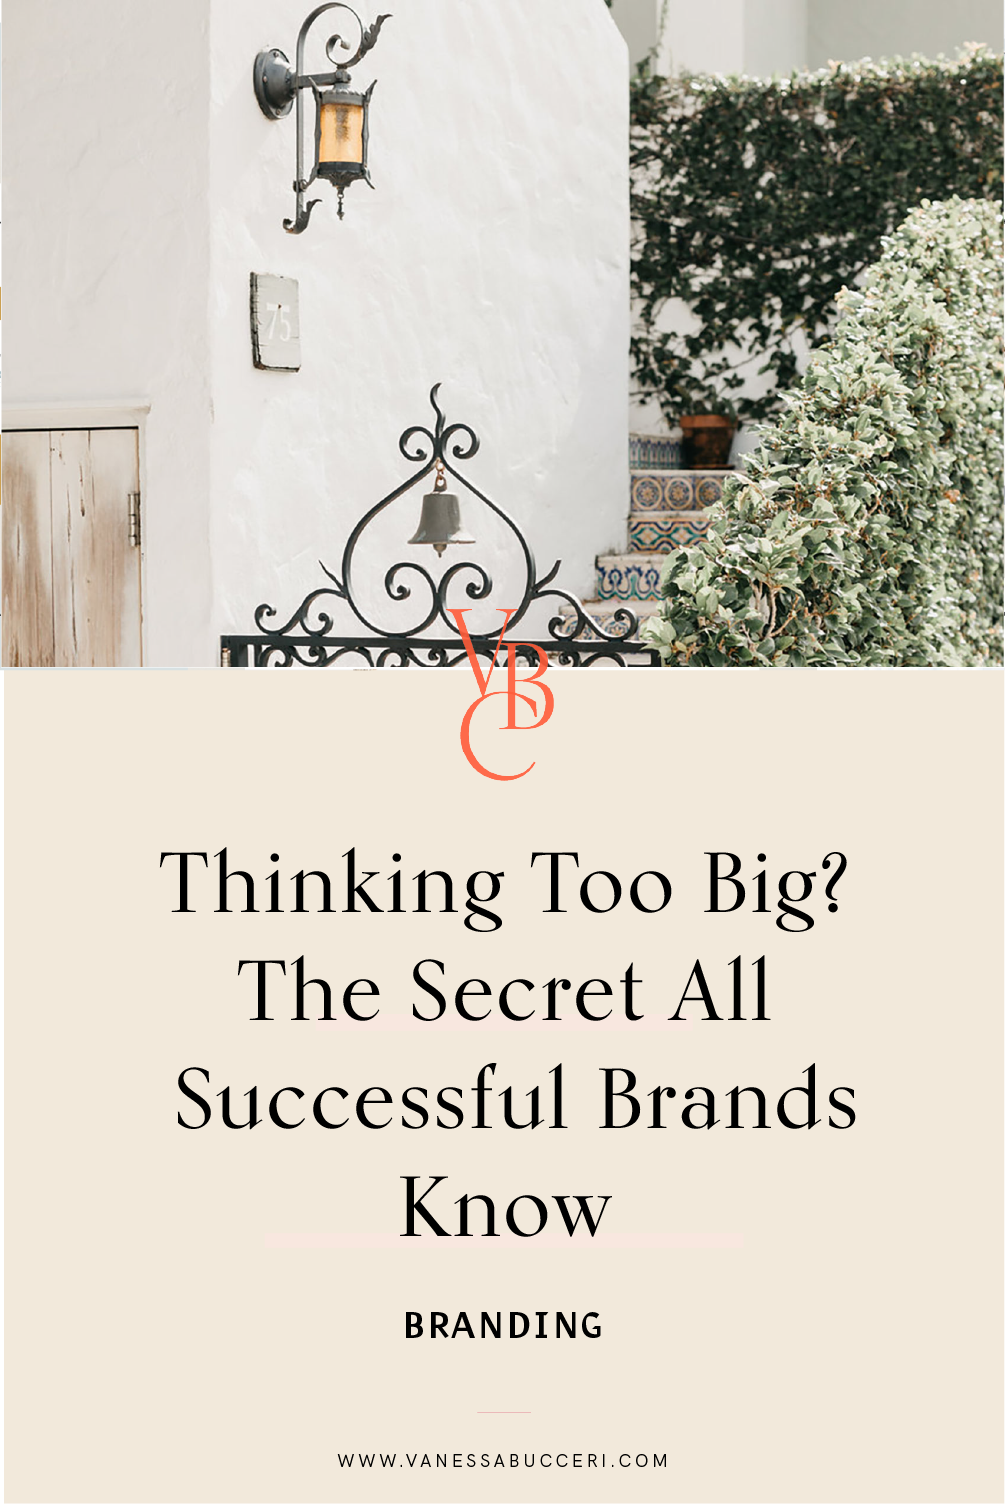 Thinking too big? The secret all successful brands know